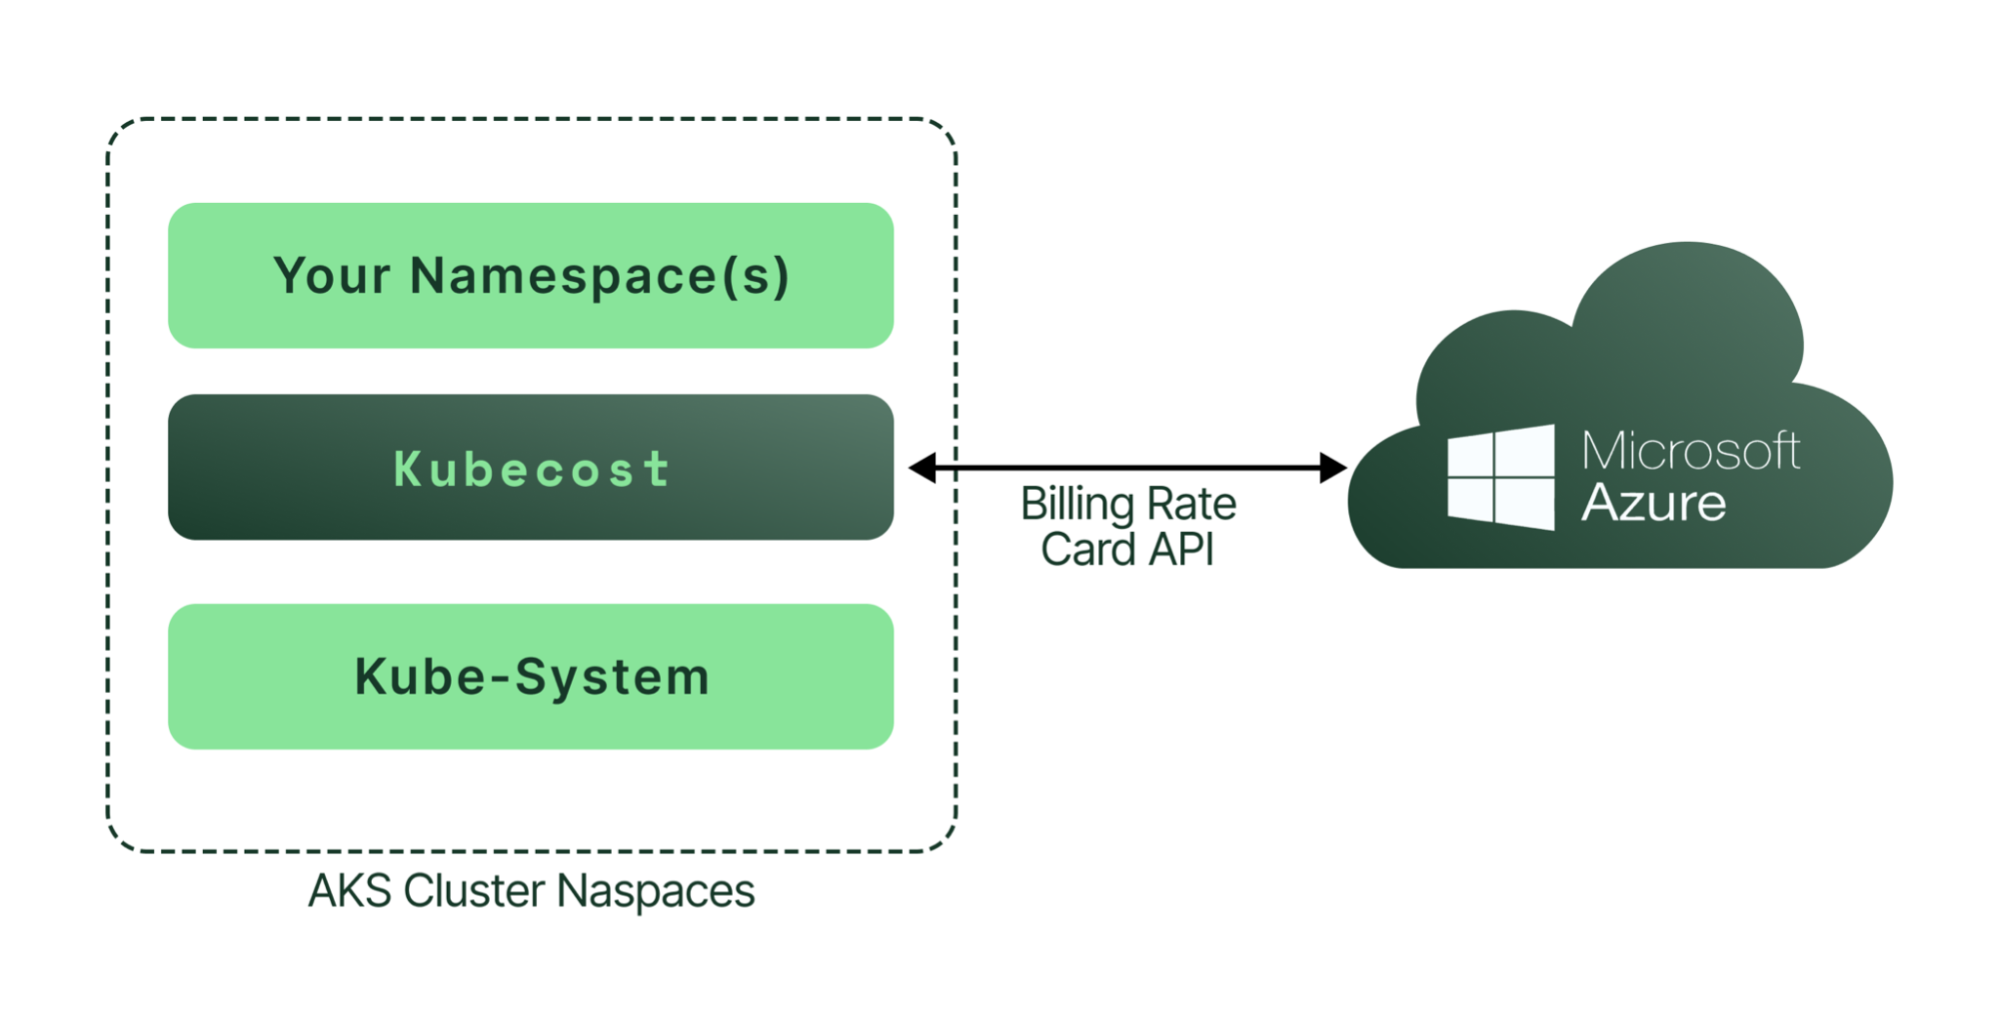 Kubecost uses the Microsoft Azure Billing Rate Card API to gather accurate and detailed cost information